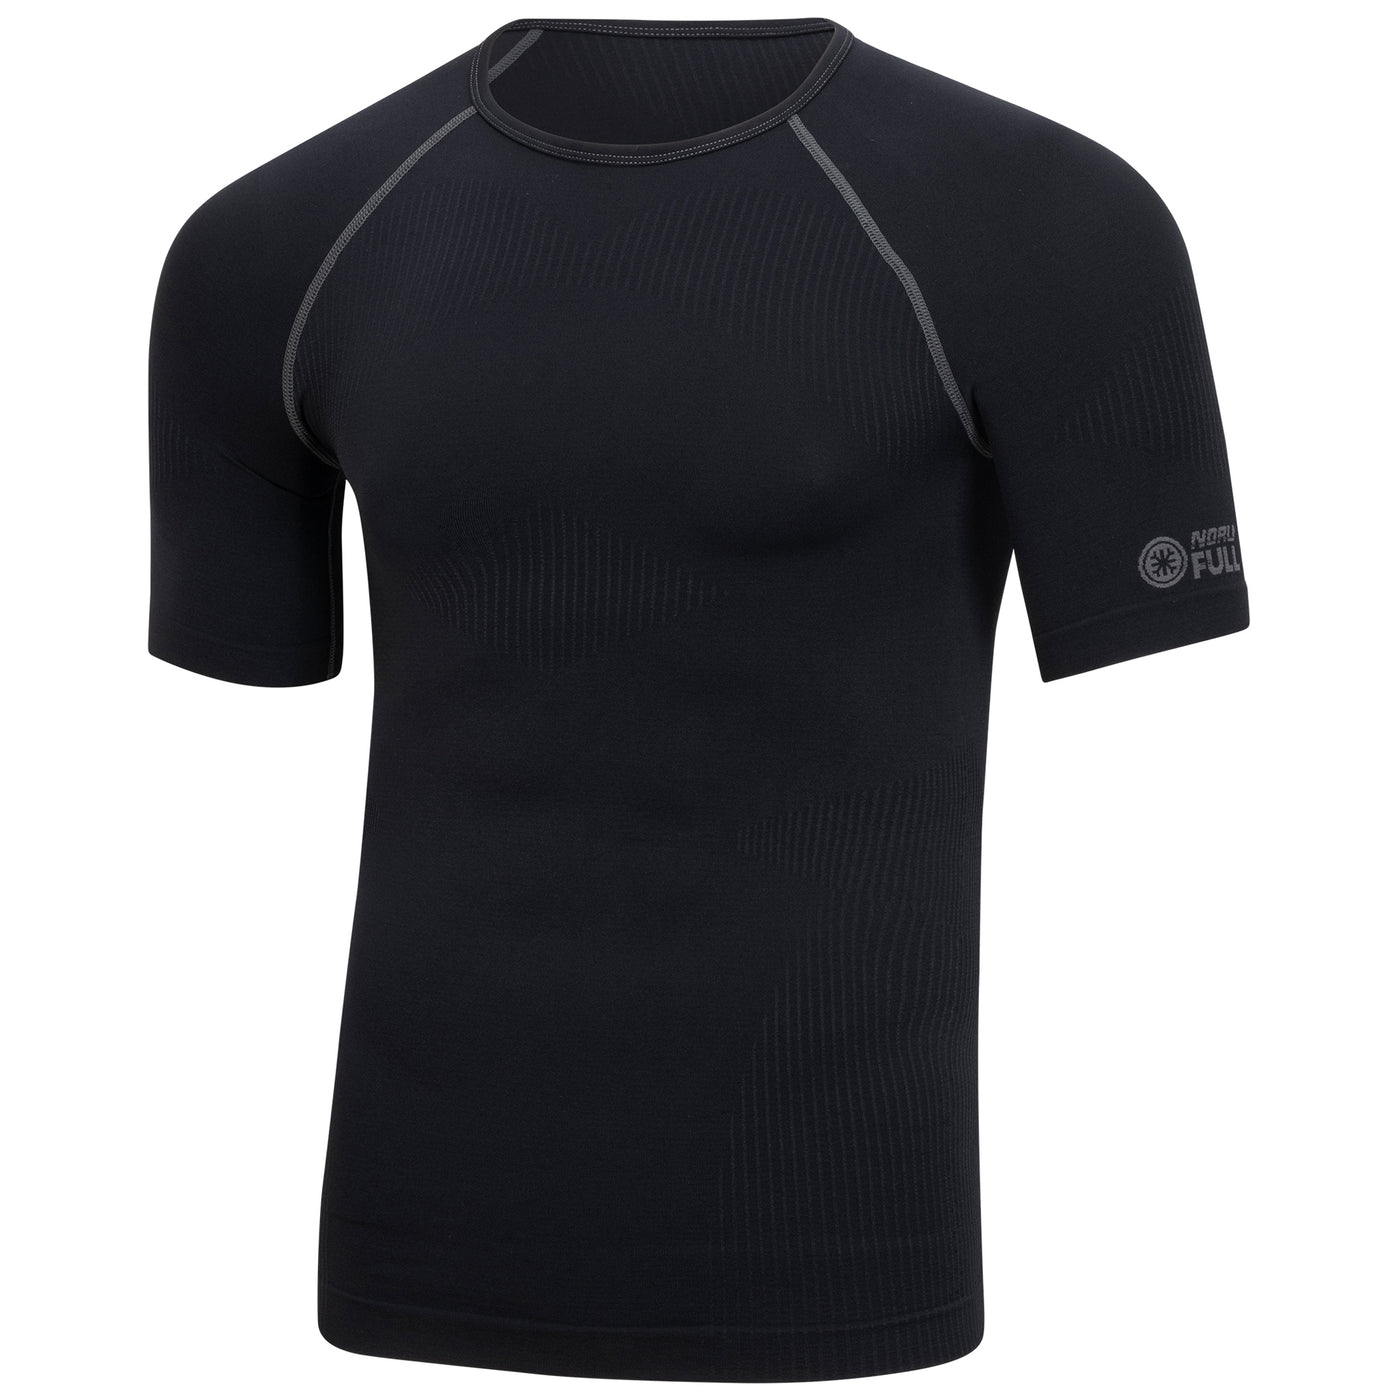 Product Image for Noru Full Cool Short Sleeve Shirt